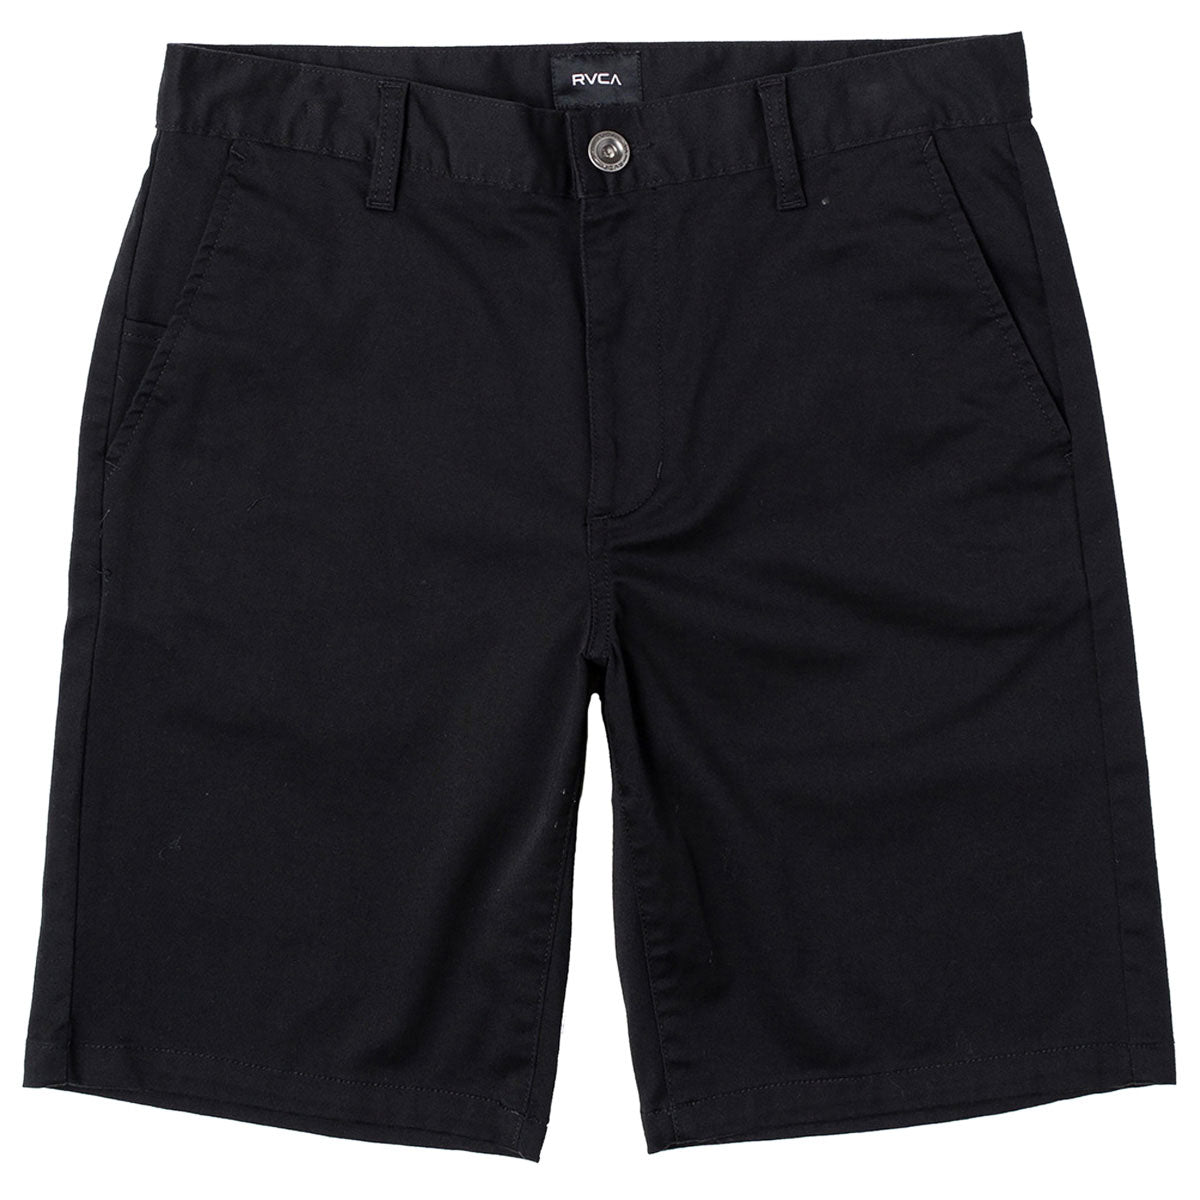 RVCA The Weekend Stretch Shorts - Black image 1